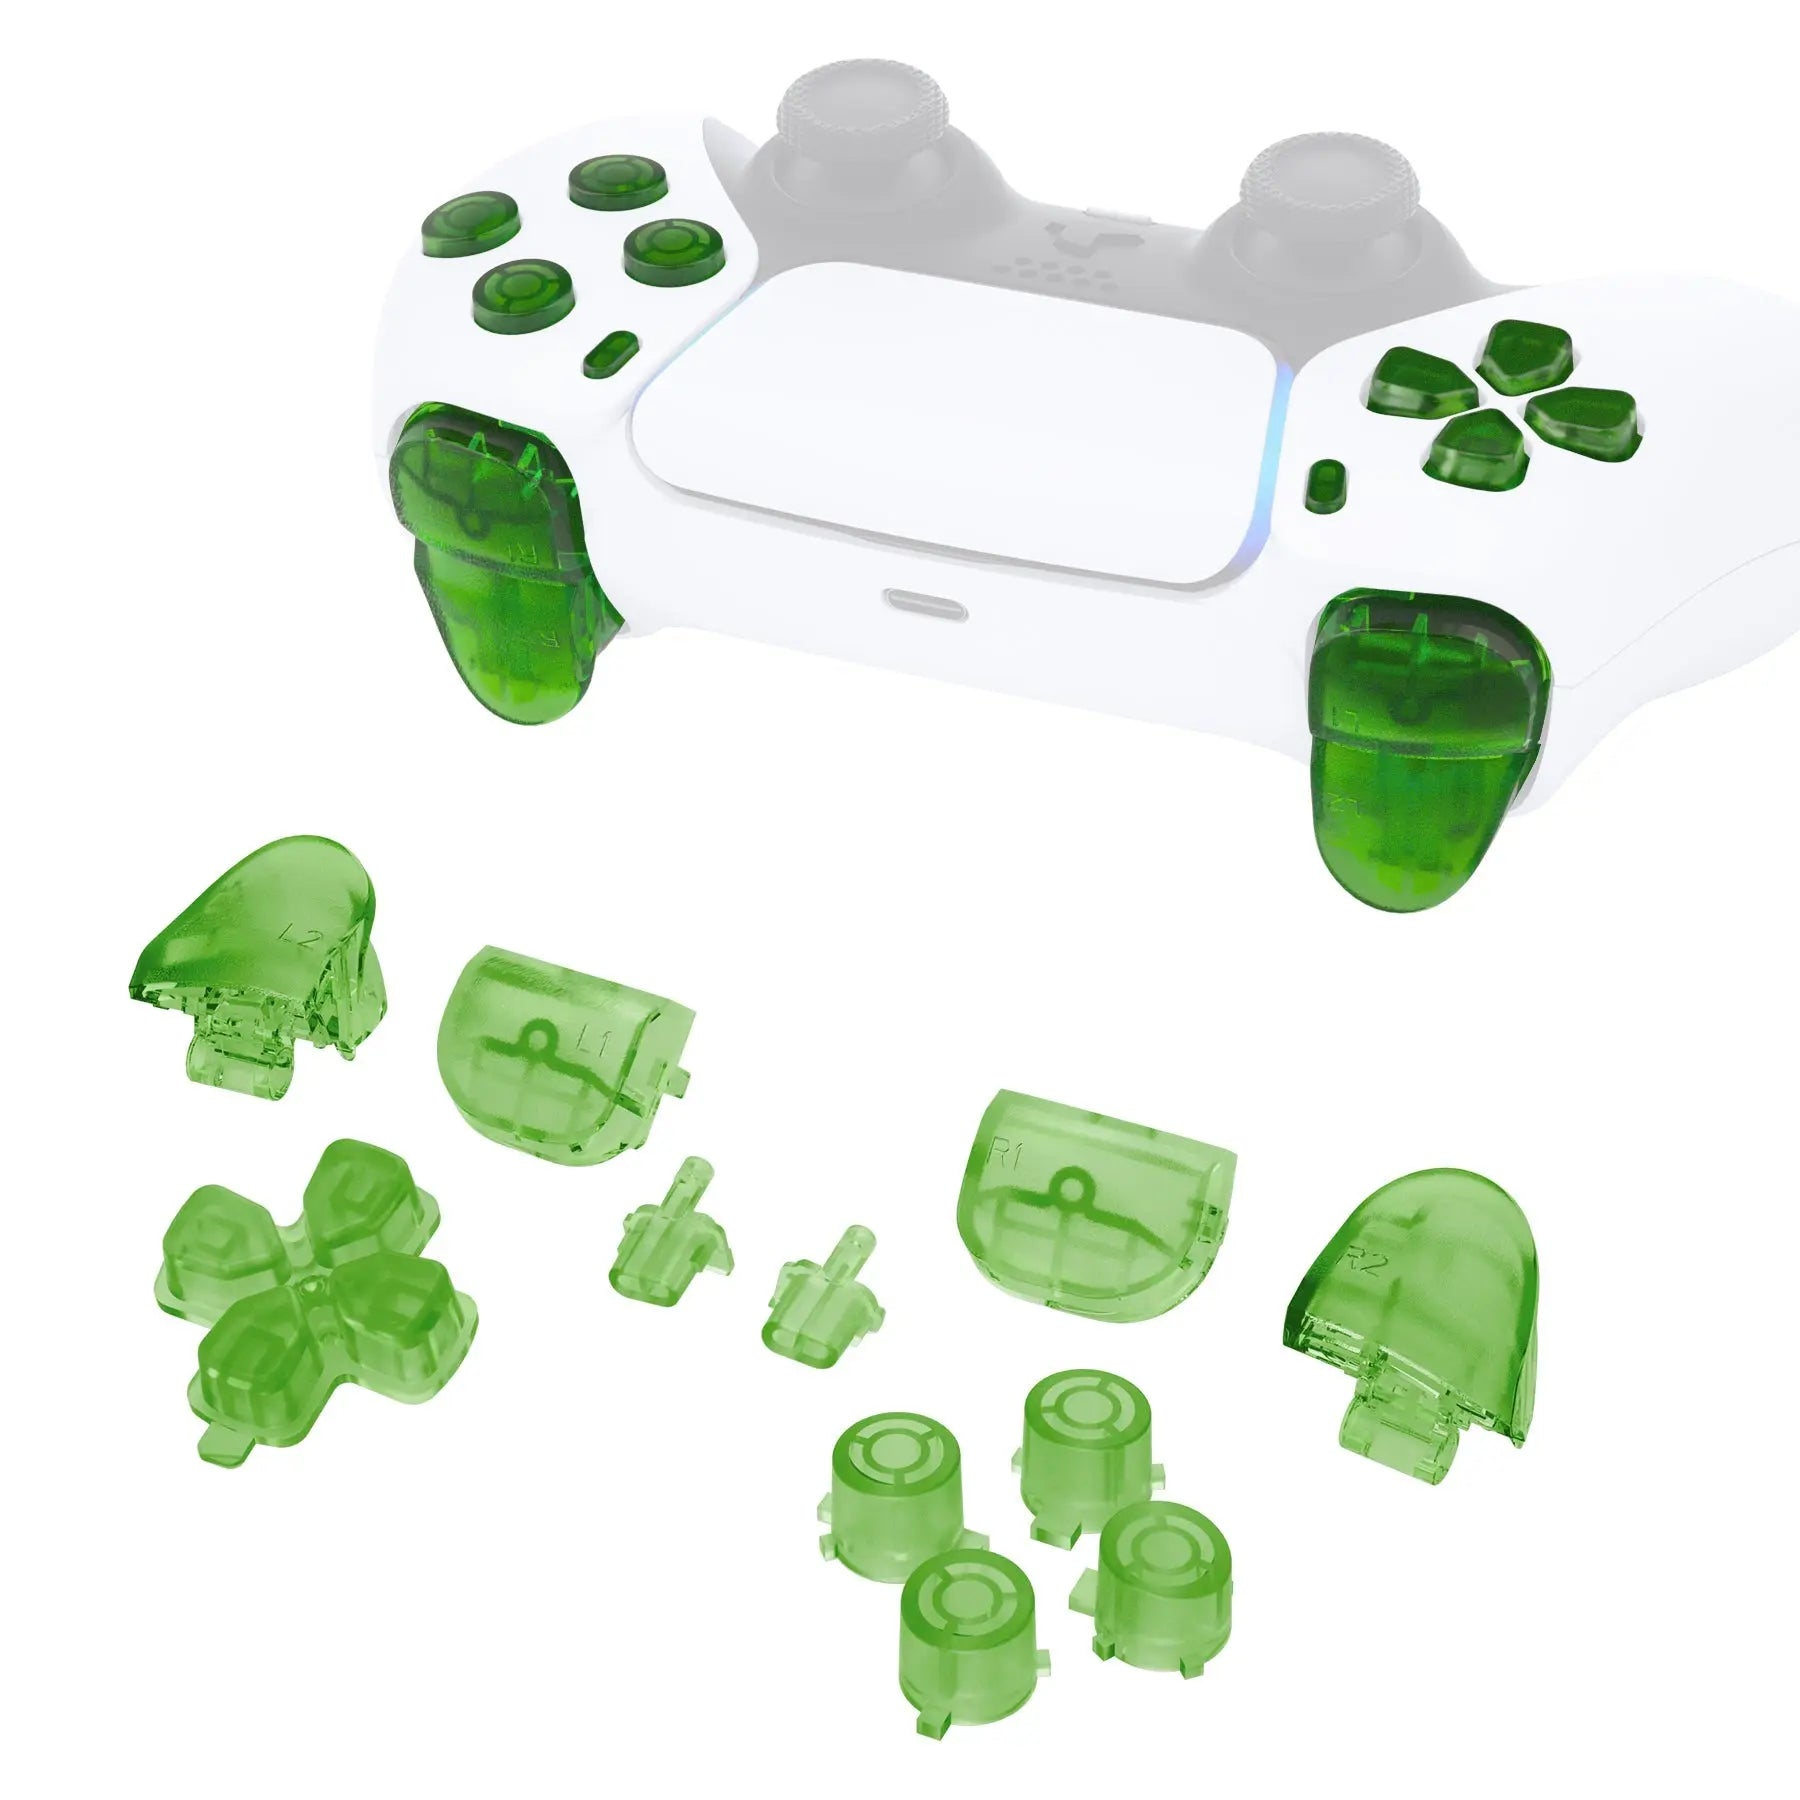 Replacement D-pad R1 L1 R2 L2 Triggers Share Options Face Buttons, Clear Green Full Set Buttons Compatible With ps5 Controller BDM-010 & BDM-020 - JPF3003G2 eXtremeRate